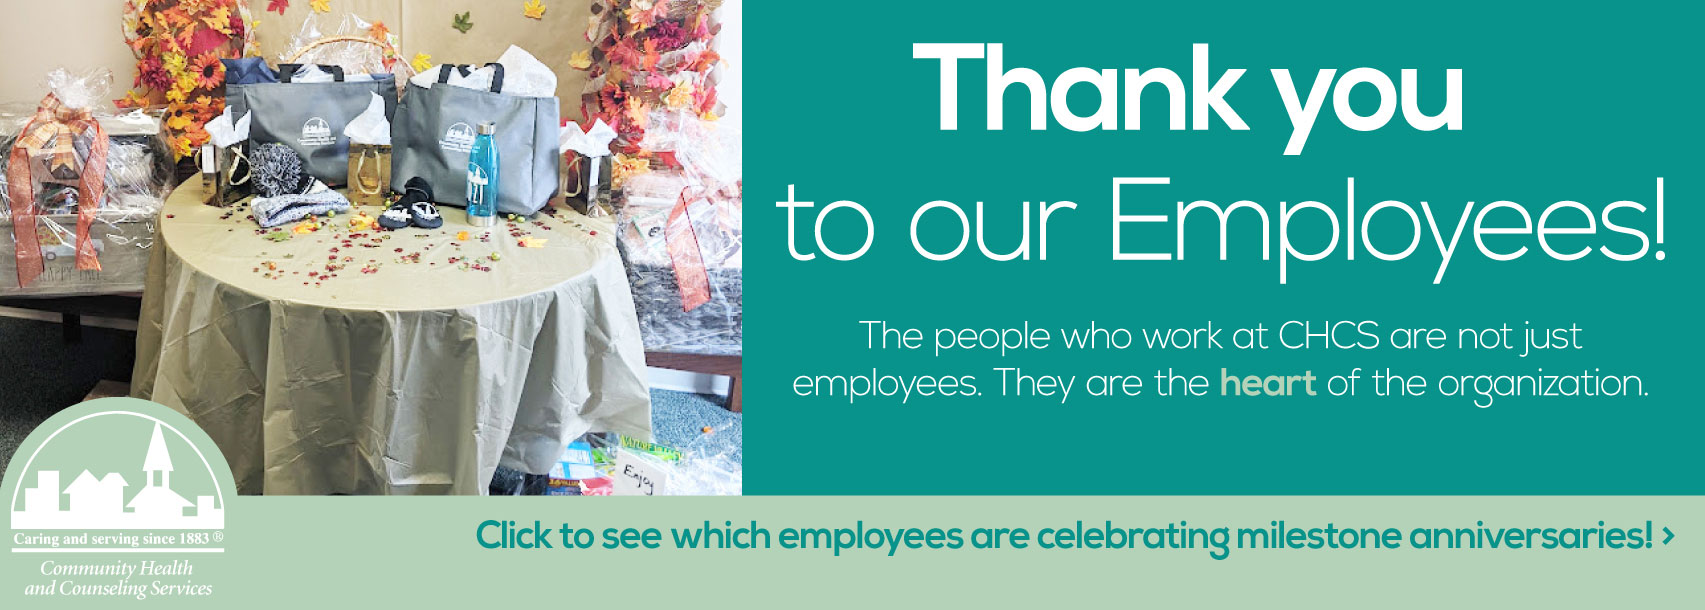 Thank you to our employees